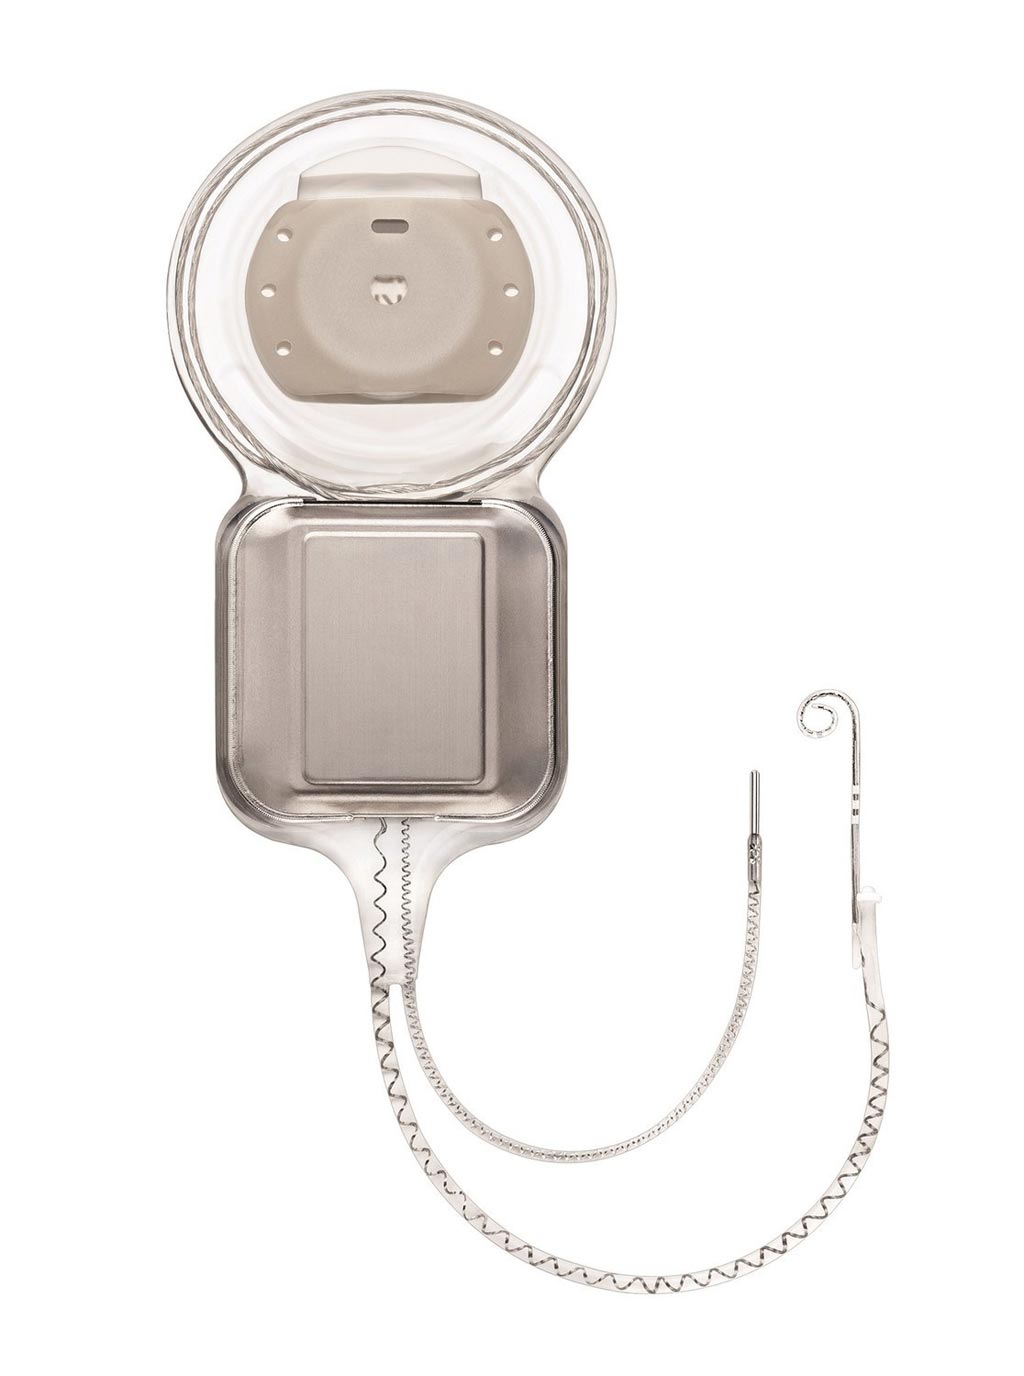 Image: The Nucleus Profile Plus Series cochlear implant (Photo courtesy of Cochlear).